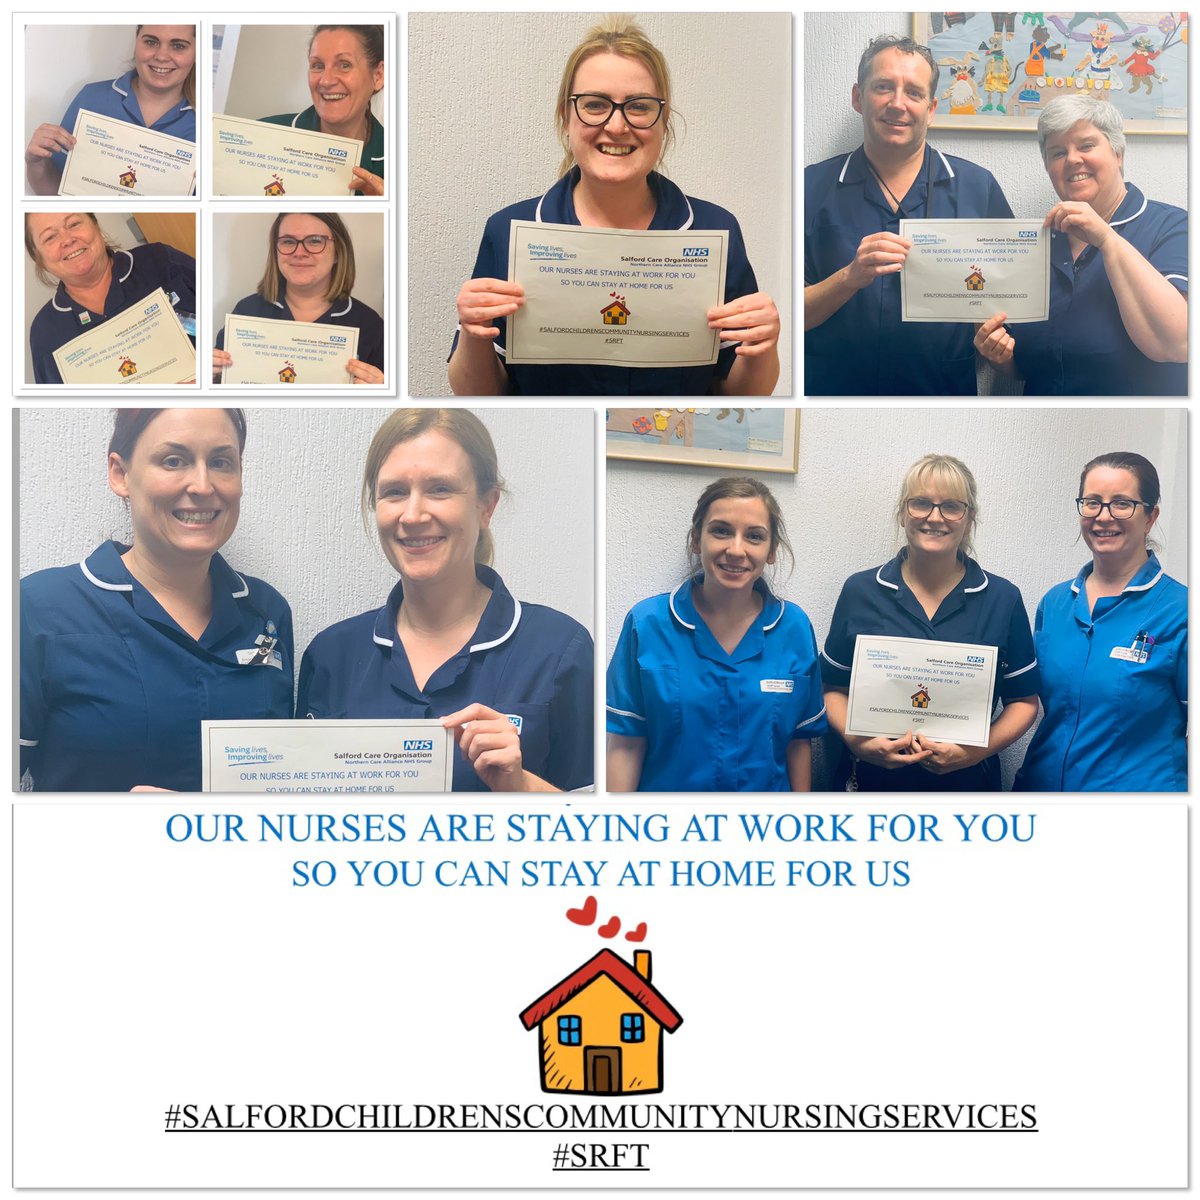 It is our privilege to work for the NHS, our nurses are staying at work for you, so you can stay at home. We couldn’t do it without all the other amazing professionals who are providing care and support to your loved ones and families #showussomelove #nhssuperstars #oneteam ❤️🏨